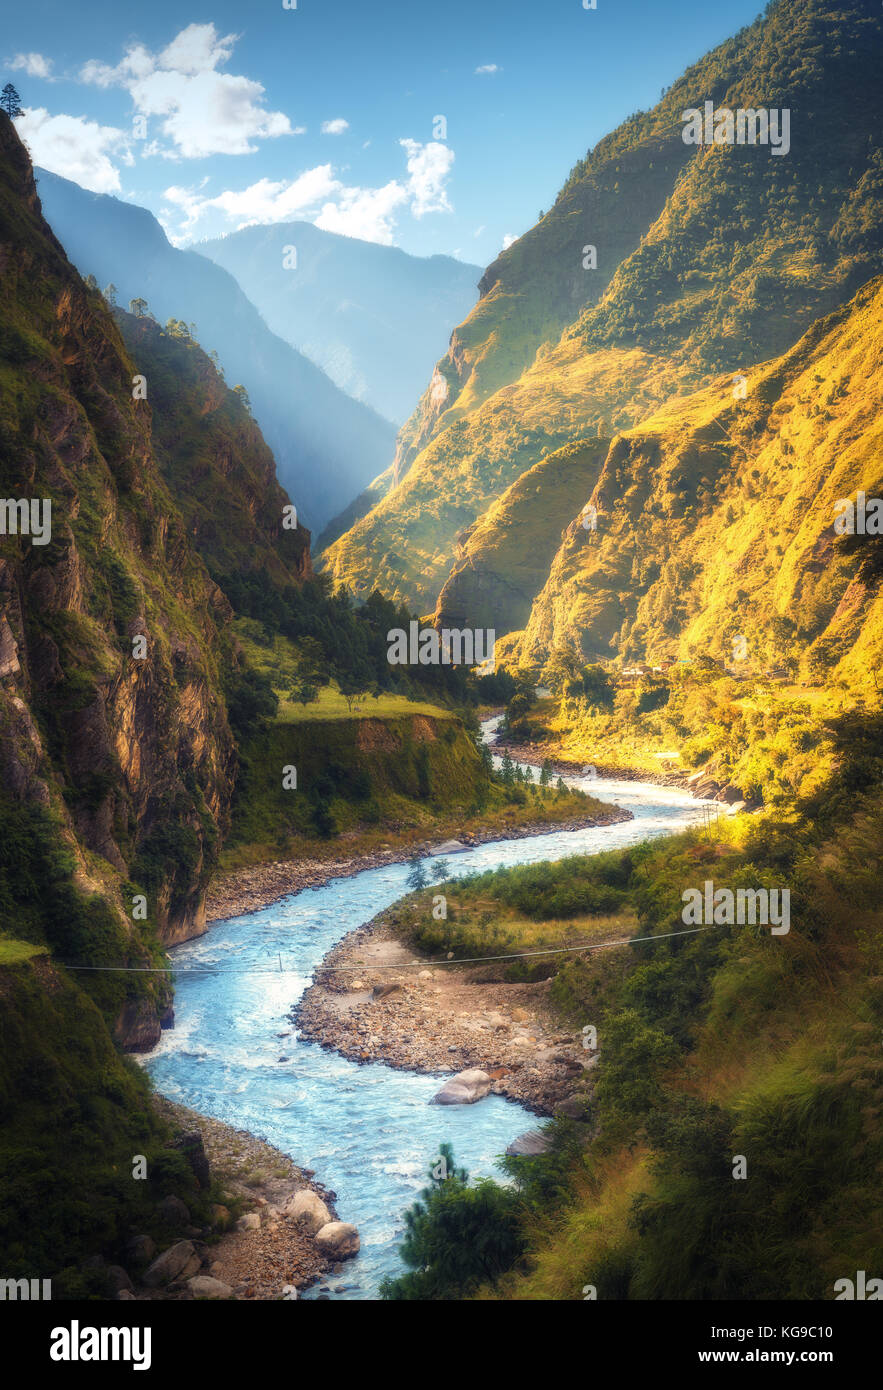 Amazing landscape with high Himalayan mountains, beautiful curving river, green forest, blue sky with clouds and yellow sunlight in autumn in Nepal. M Stock Photo